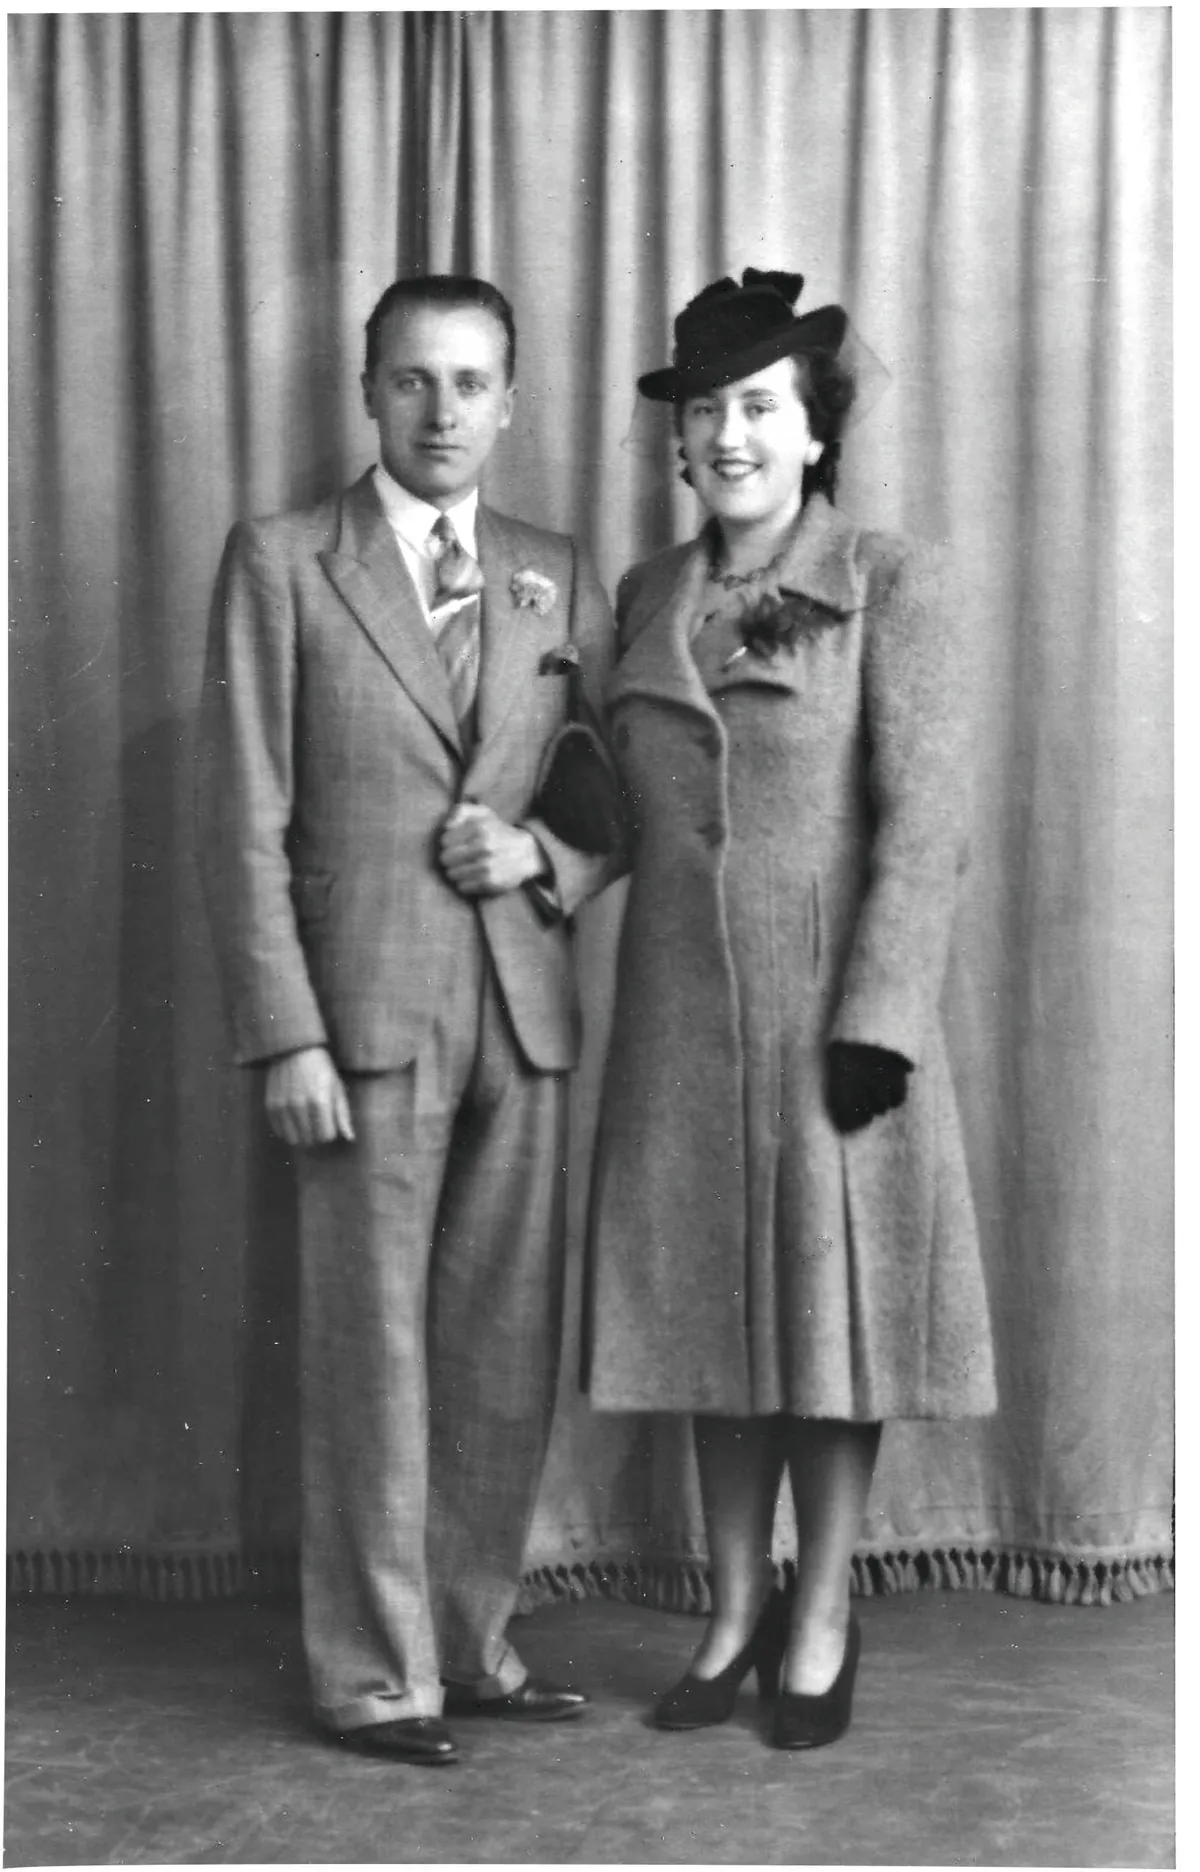 Black and white photograph of a man wearing a suit and a woman wearing a hat with a veil posing for their wedding